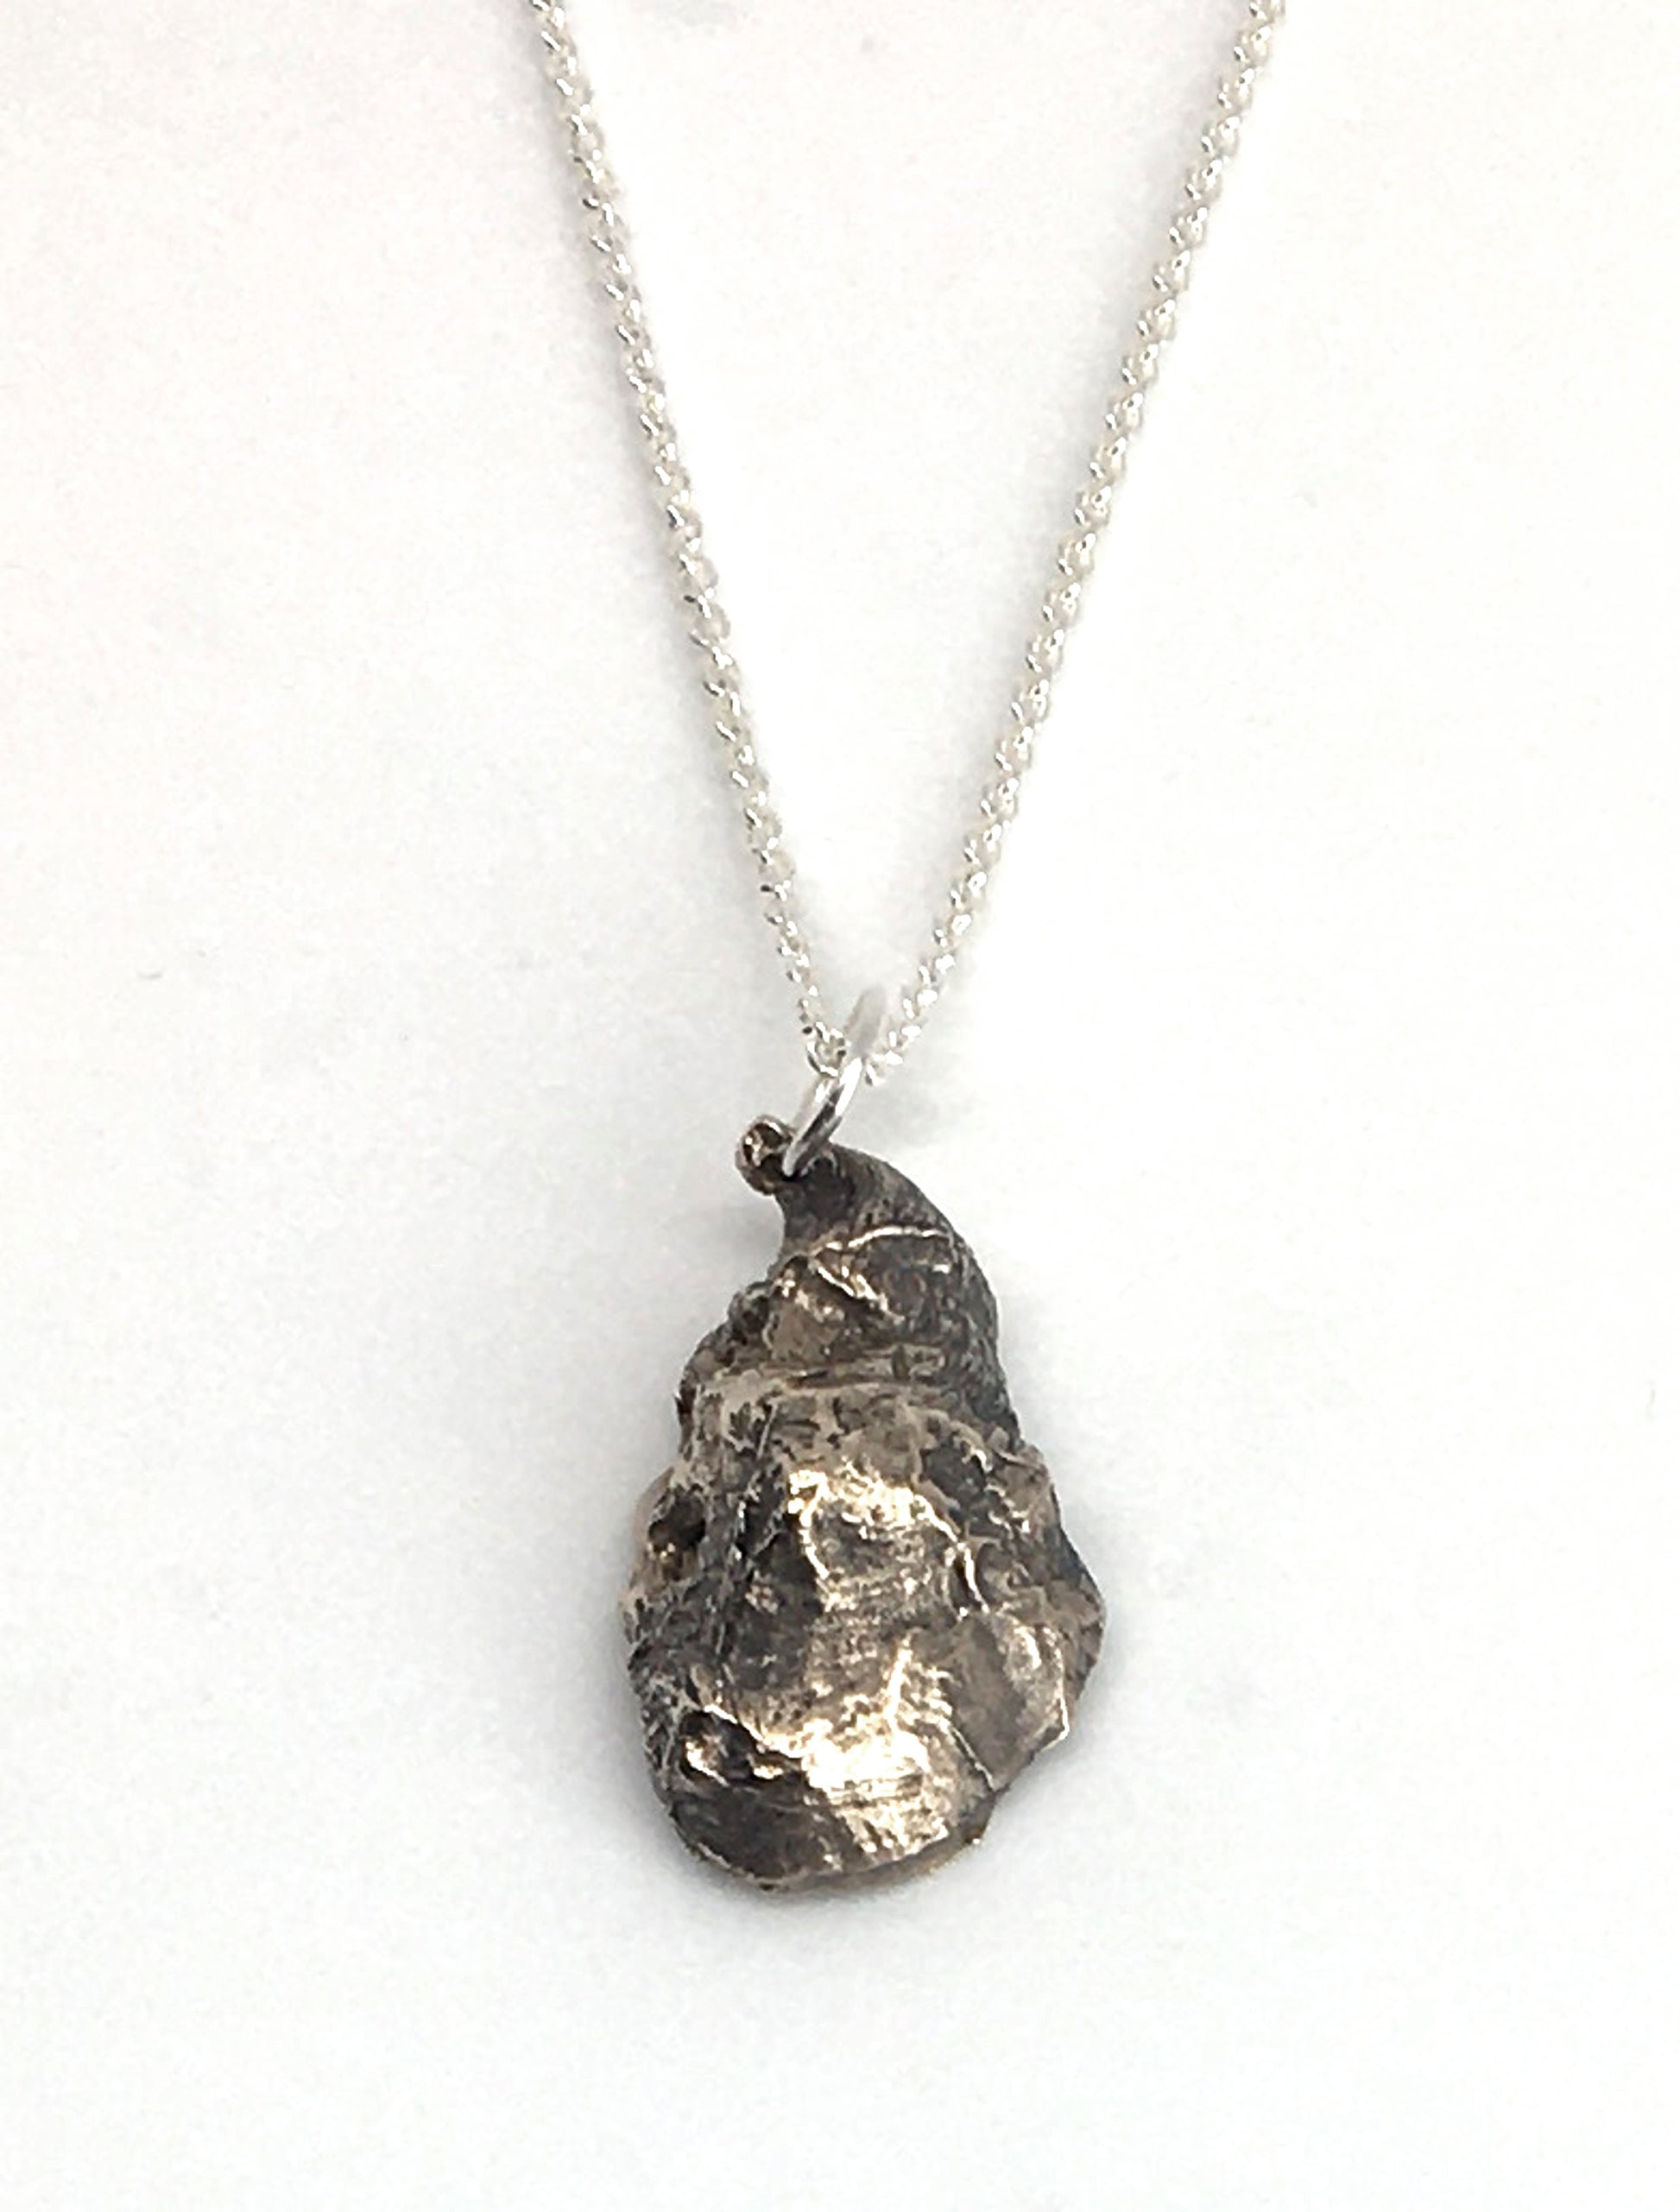 sterling silver oyster shell pendant necklace on sterling silver cable chain